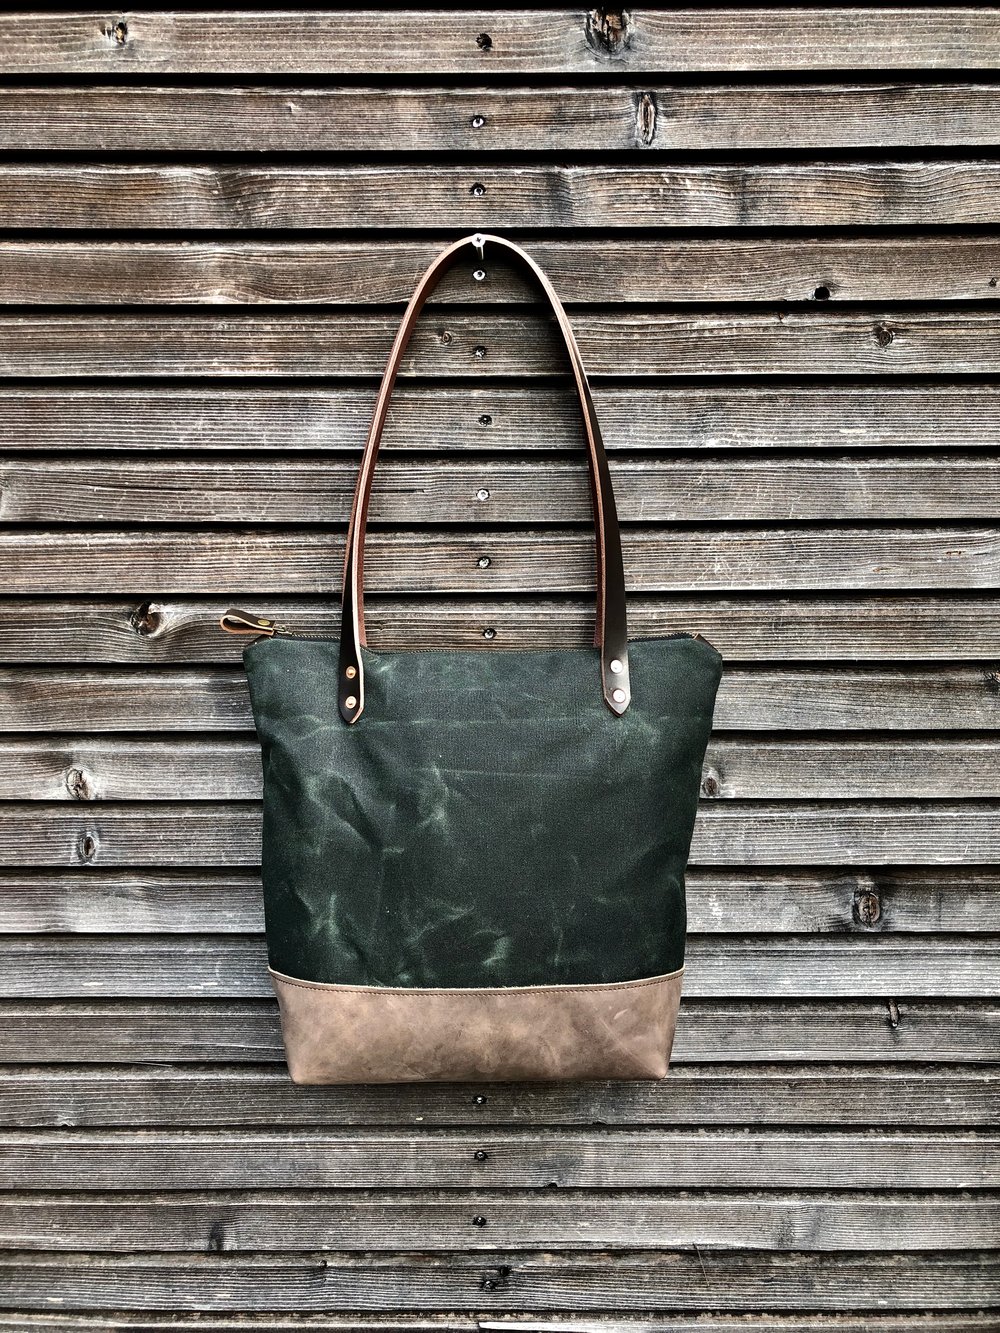 Waxed canvas tote bag with leather handles and zipper closure ...